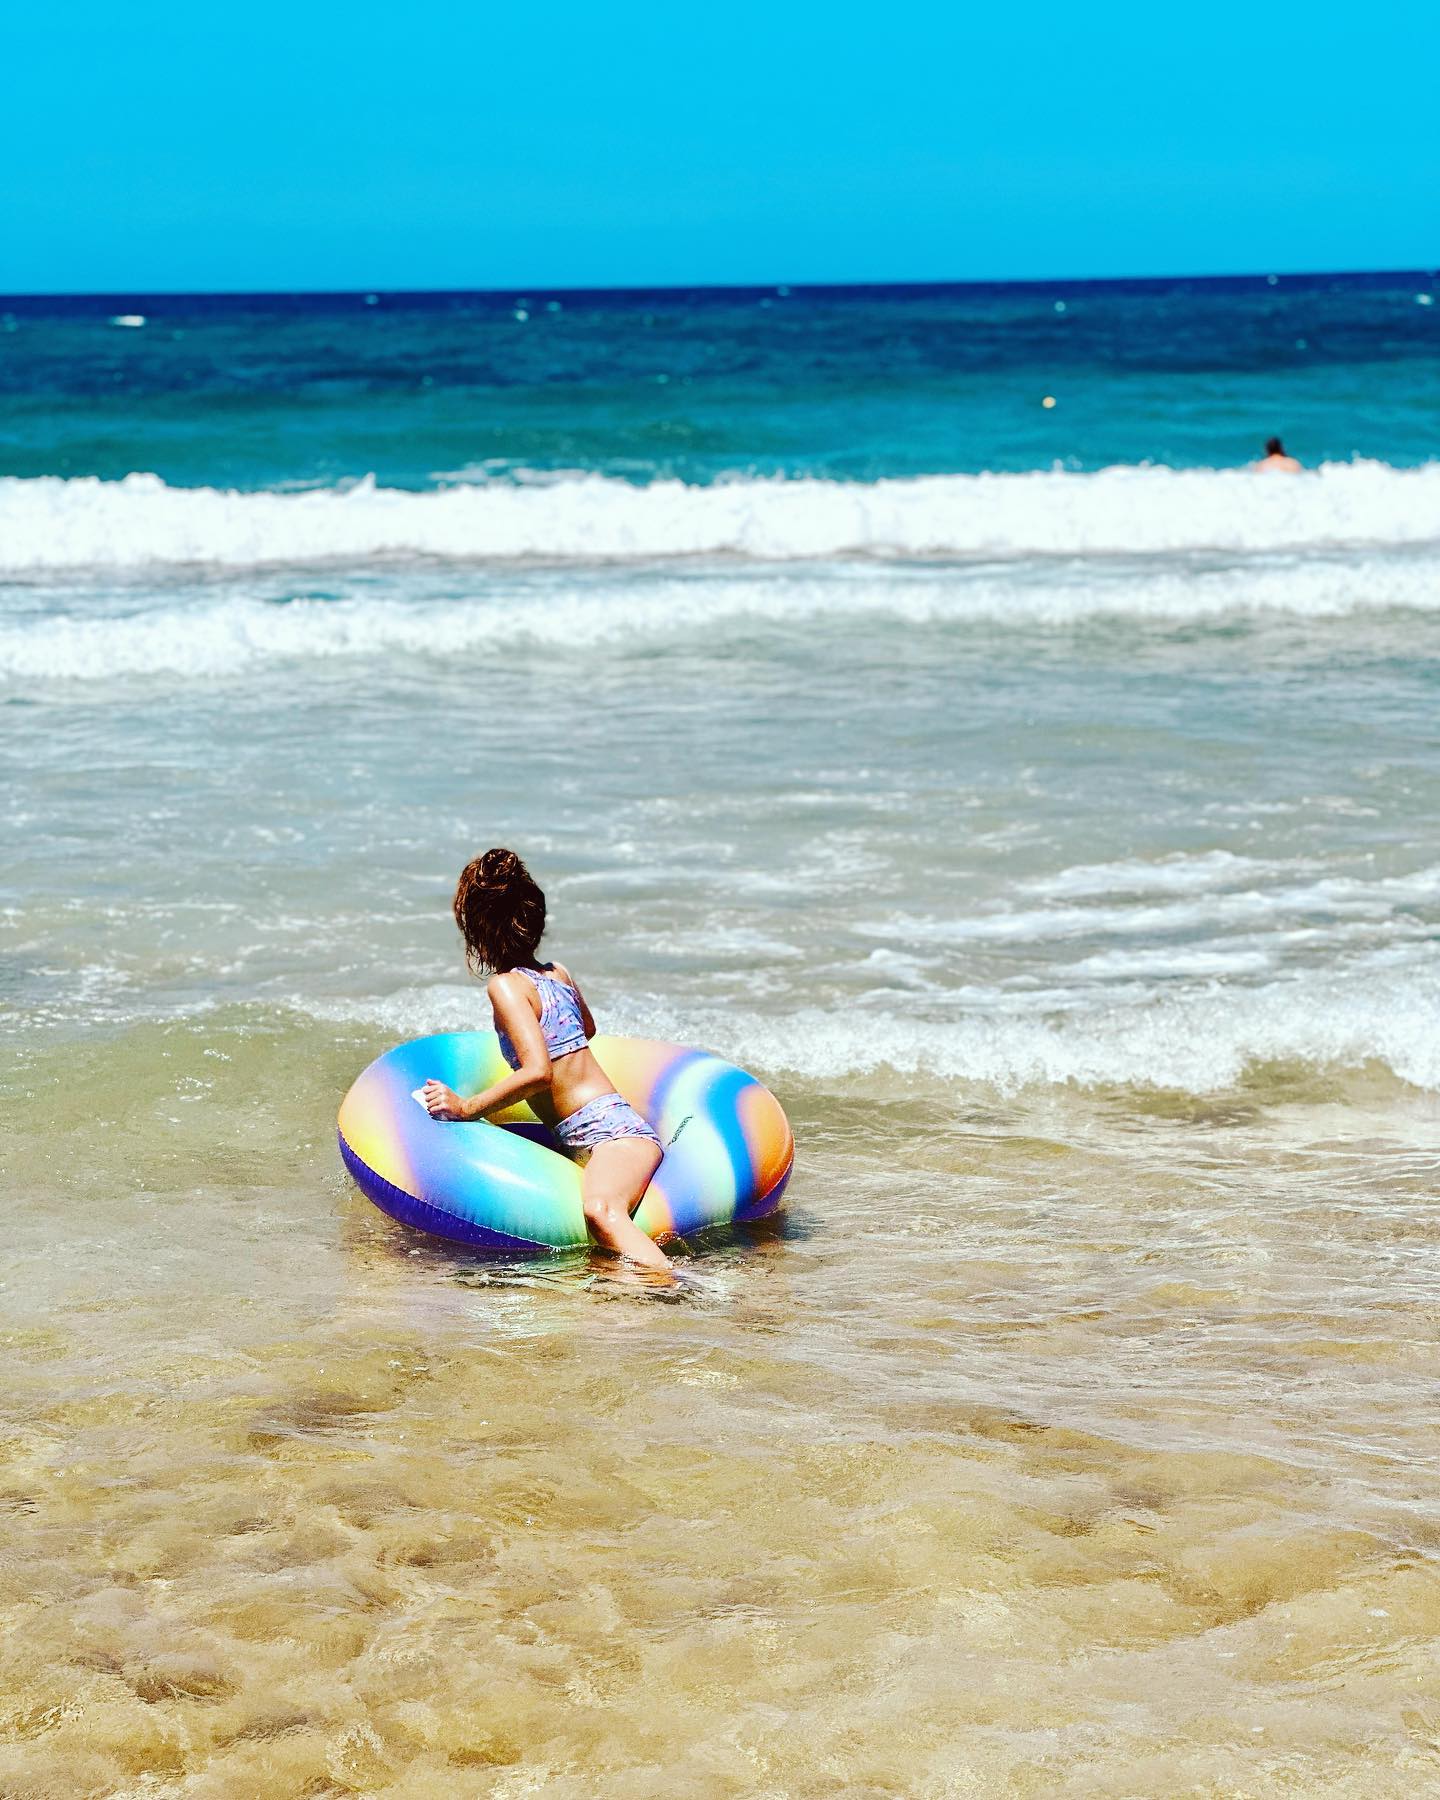 Photo by ⓋⒶⓈⒾⓁⒾⓀⒾ ⓁⒶⓈⓀⒶⓇⒶⓀⒾ in Heraklion Greece. May be an image of 2 people beach ball raft and beanbag chair